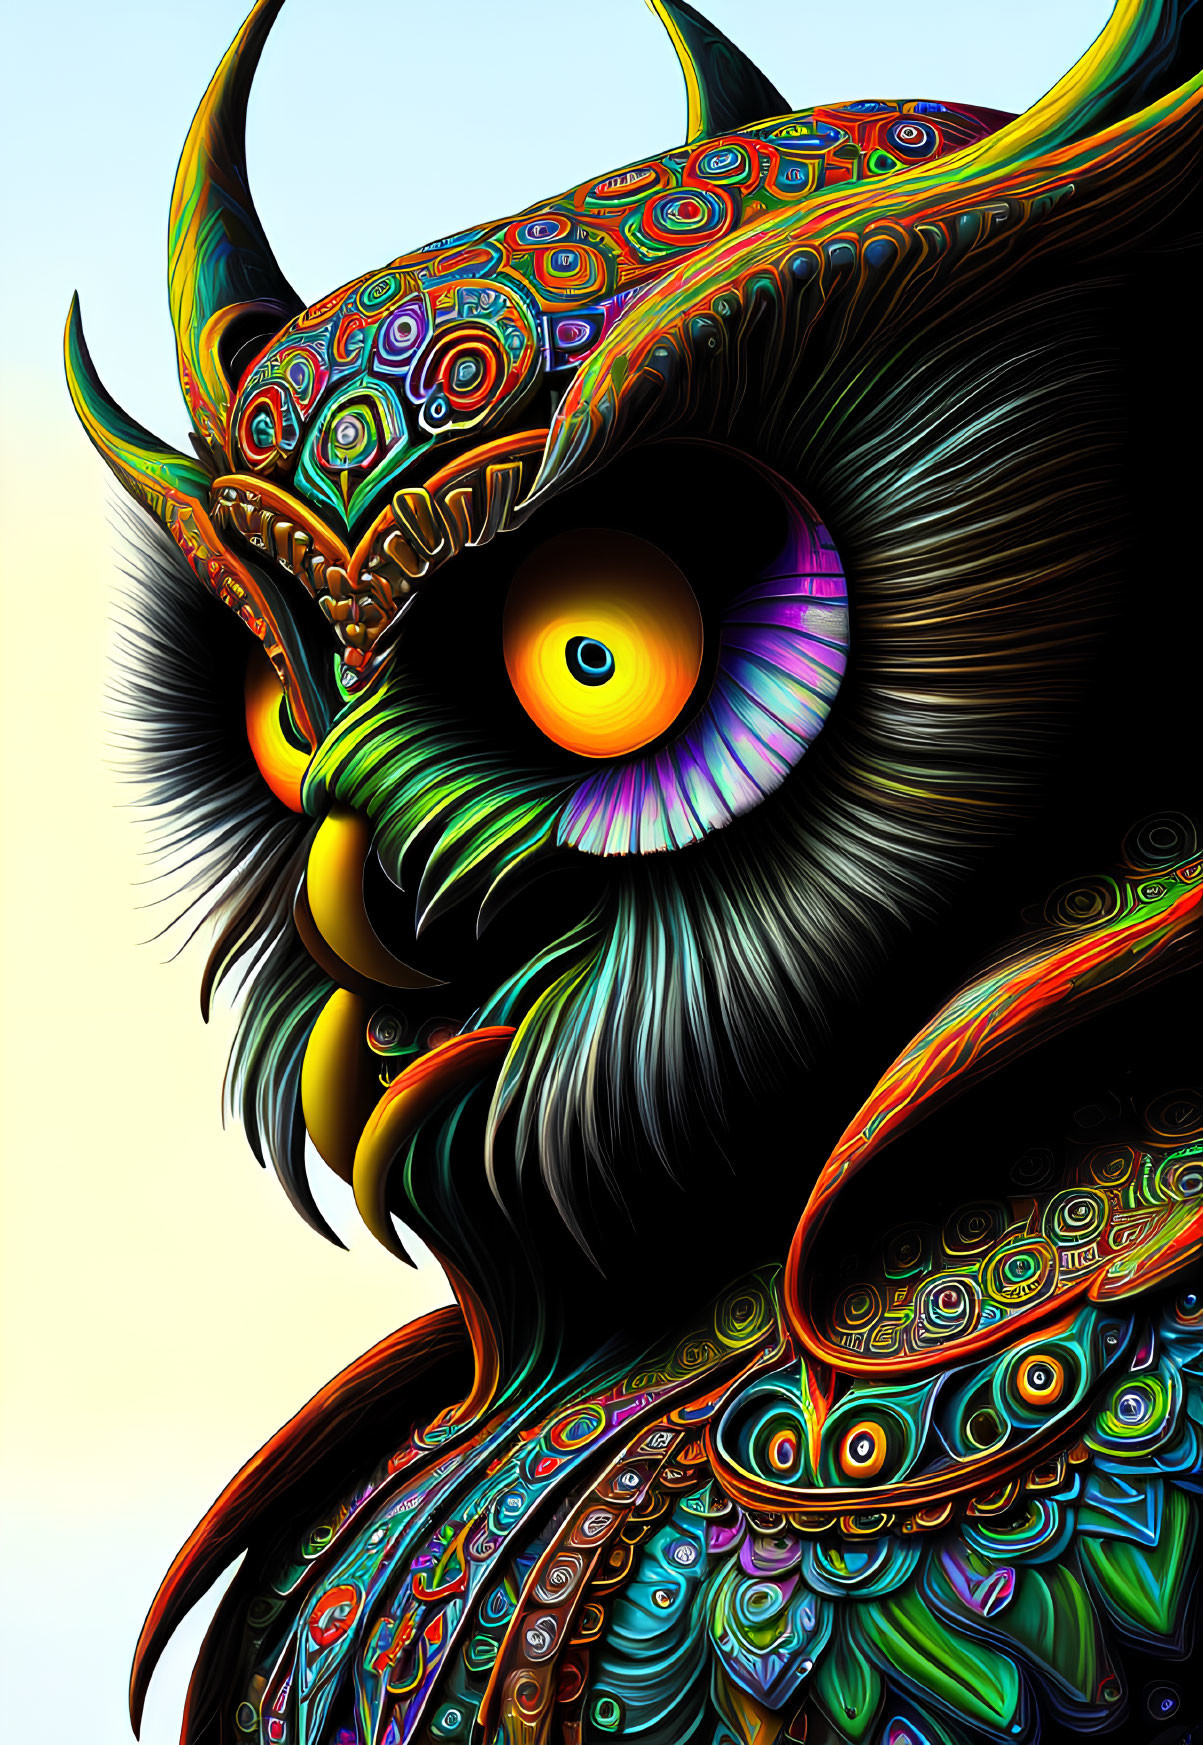 Colorful Owl Illustration with Swirling Eyes and Ornate Feathers